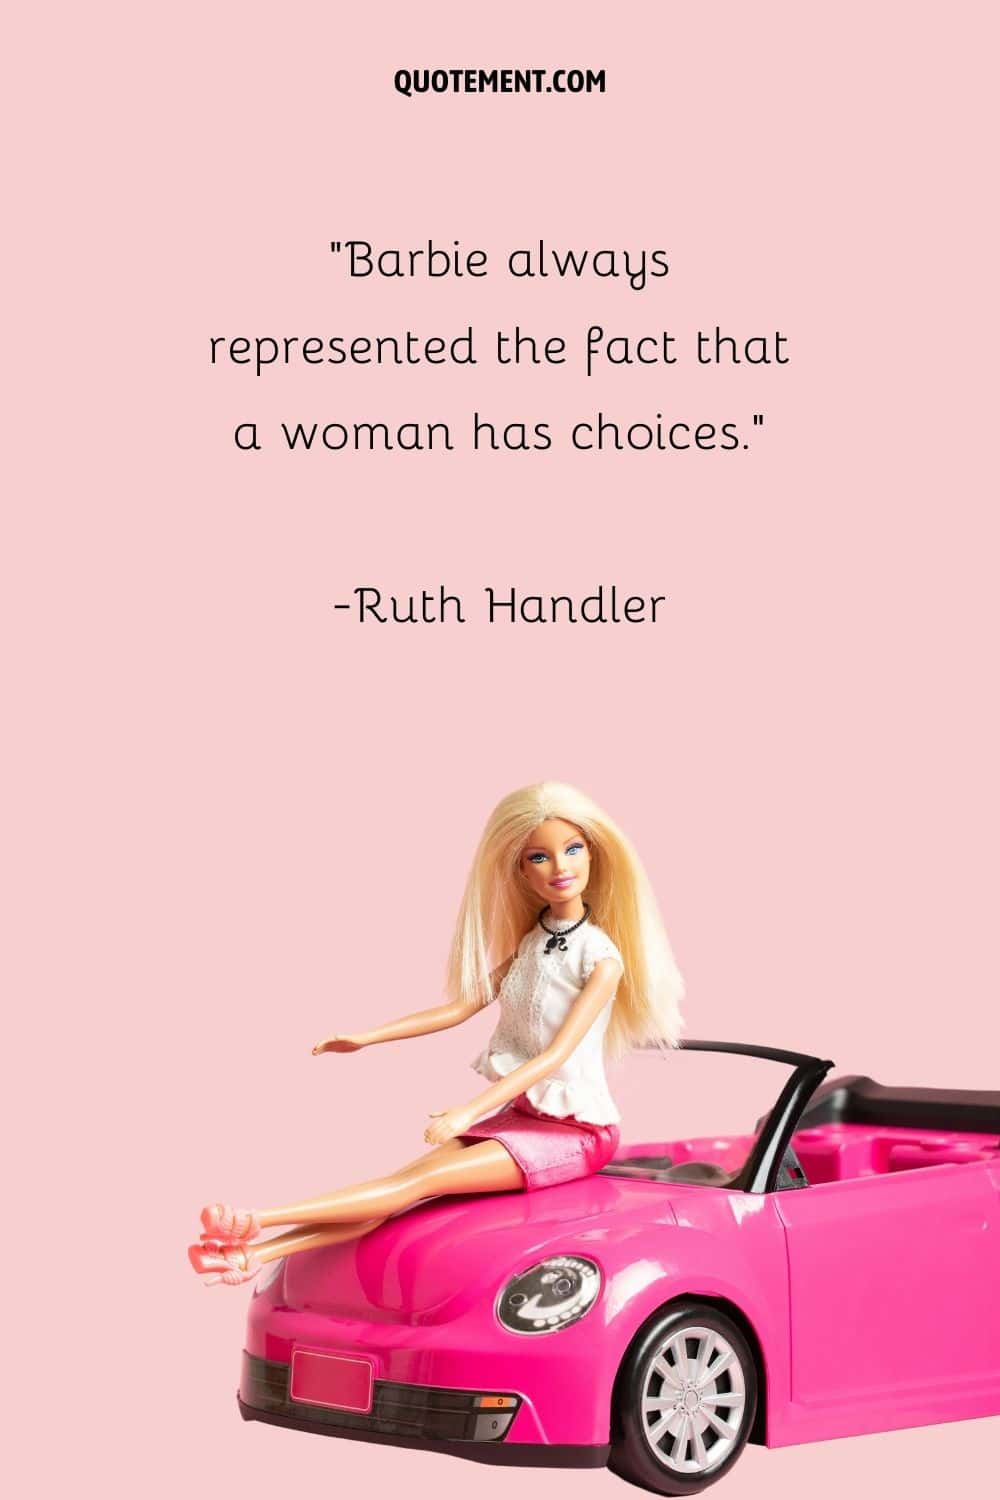 Barbie always represented the fact that a woman has choices